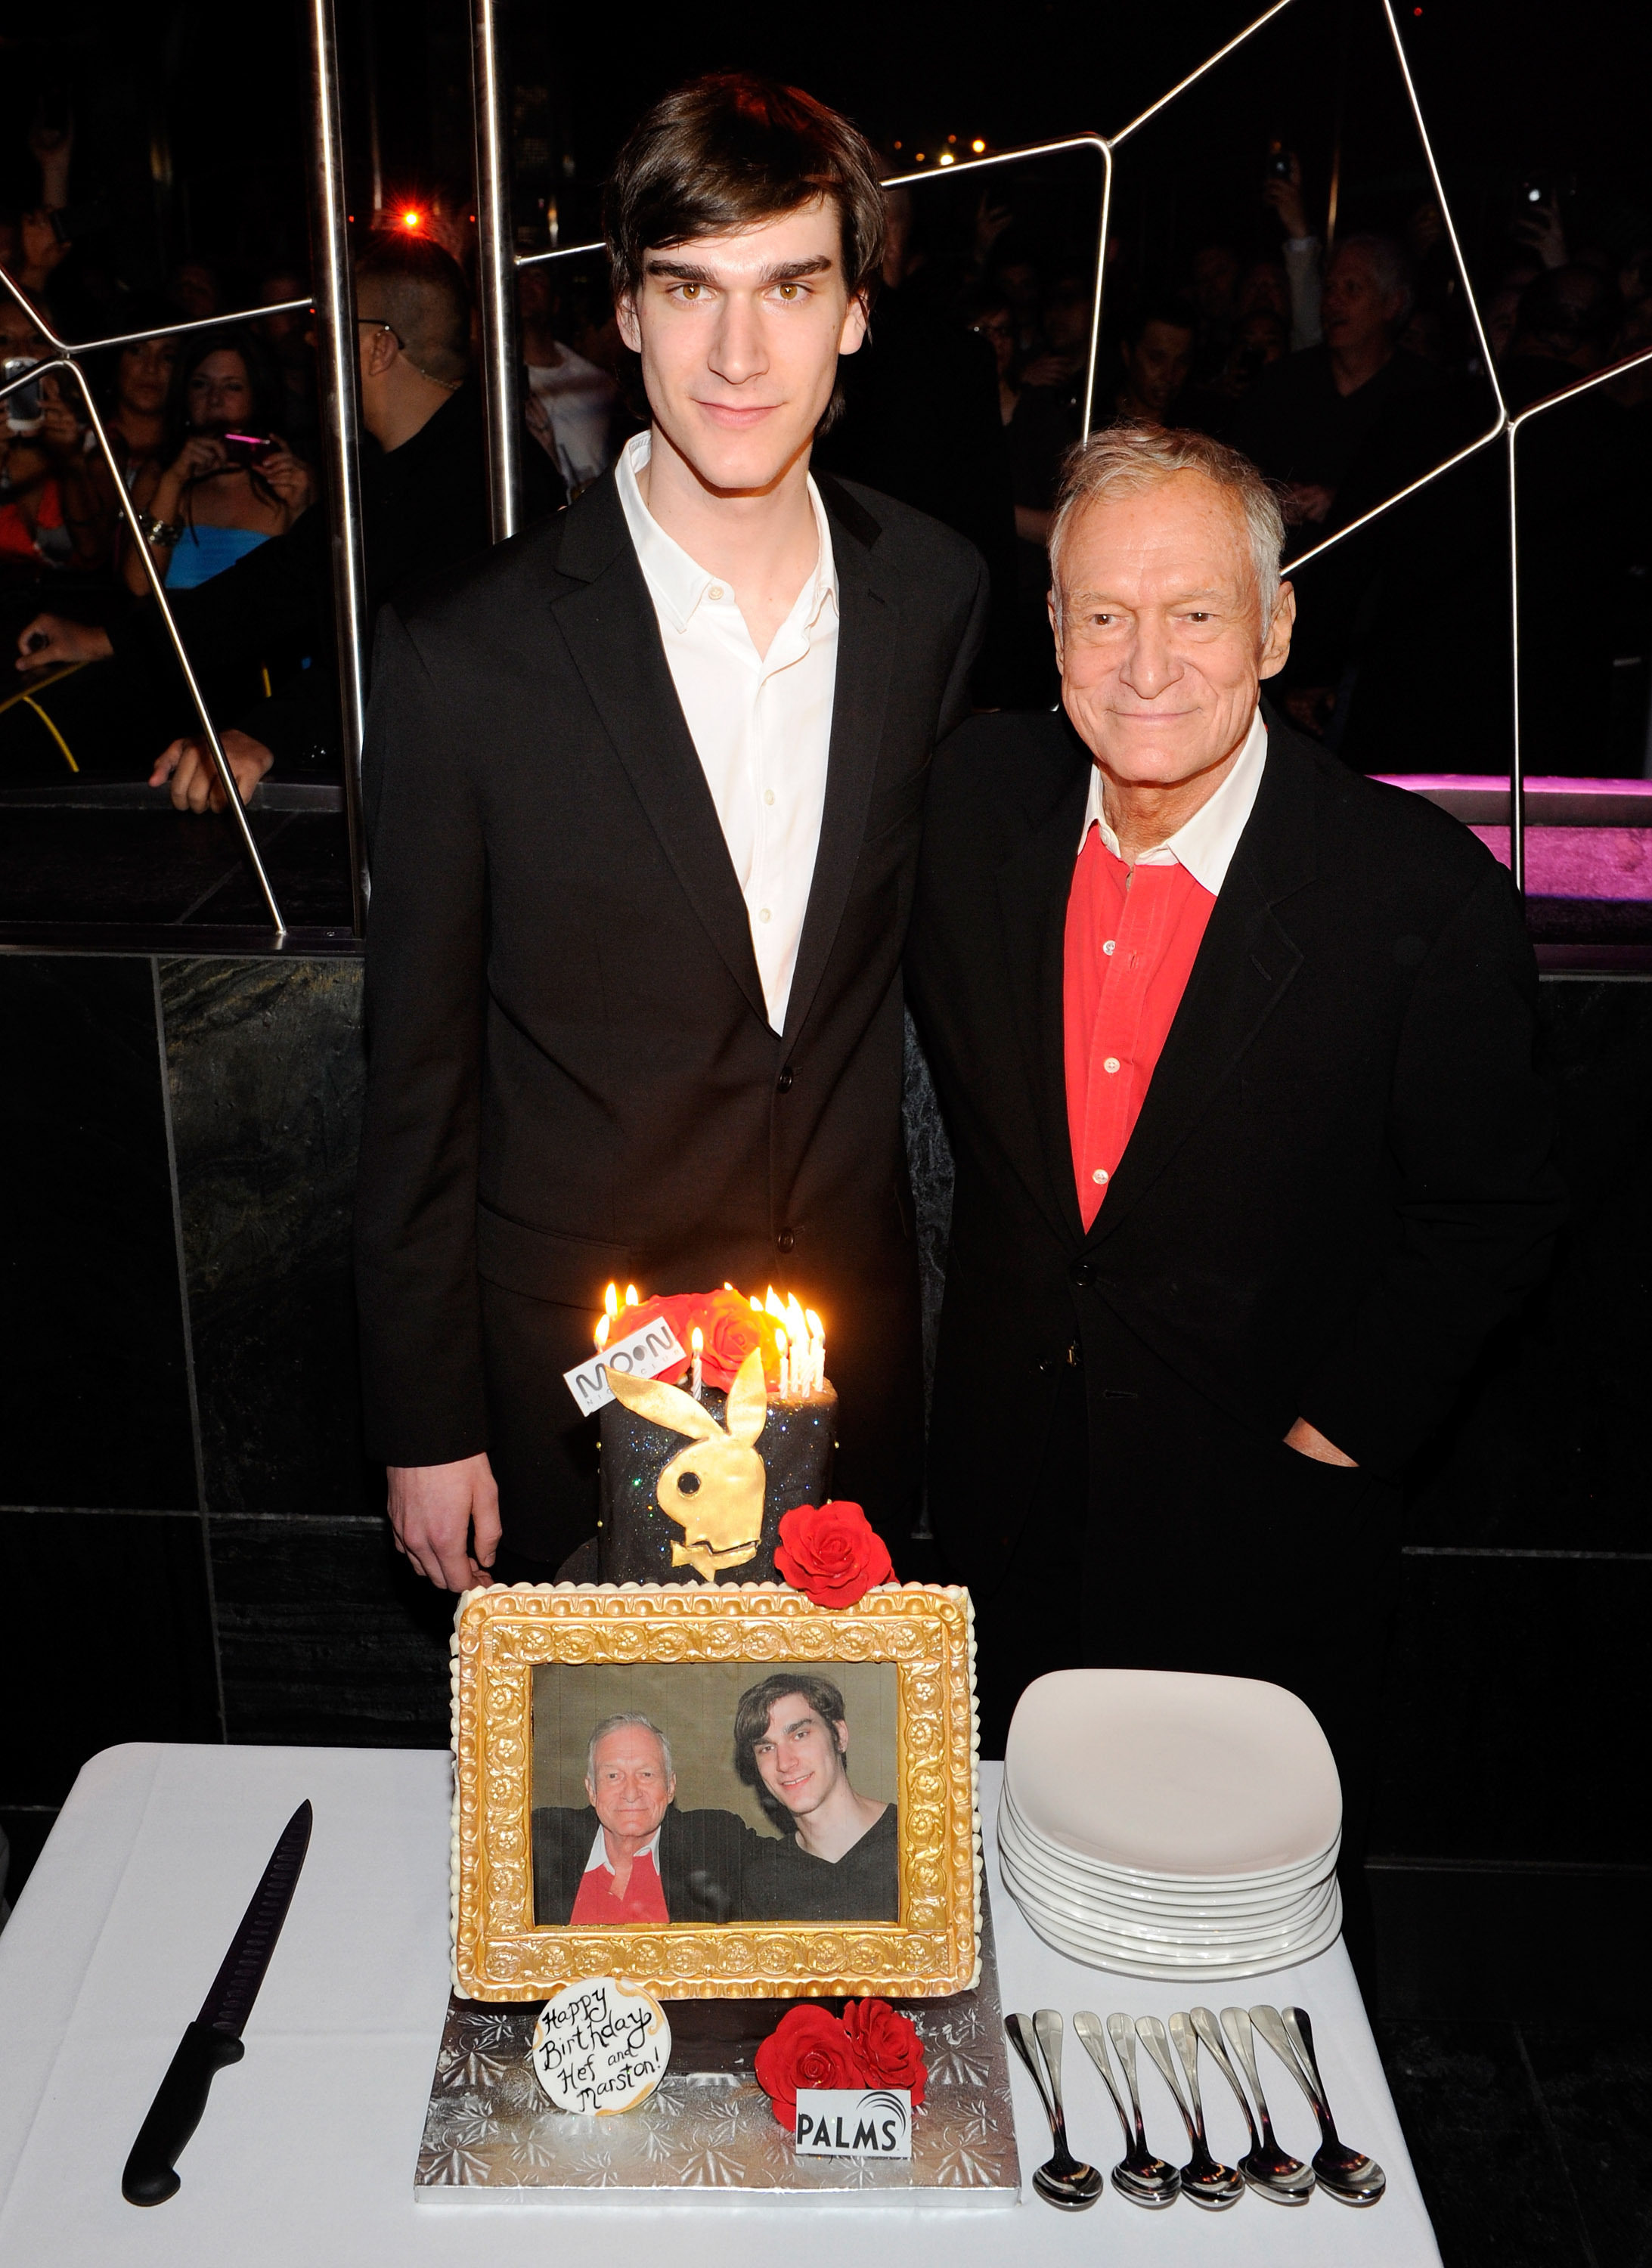 Marston Hefner and his late father, Playboy founder Hugh Hefner, celebrated their 21st and 85th birthdays together in Las Vegas in 2011. Photo: WireImage